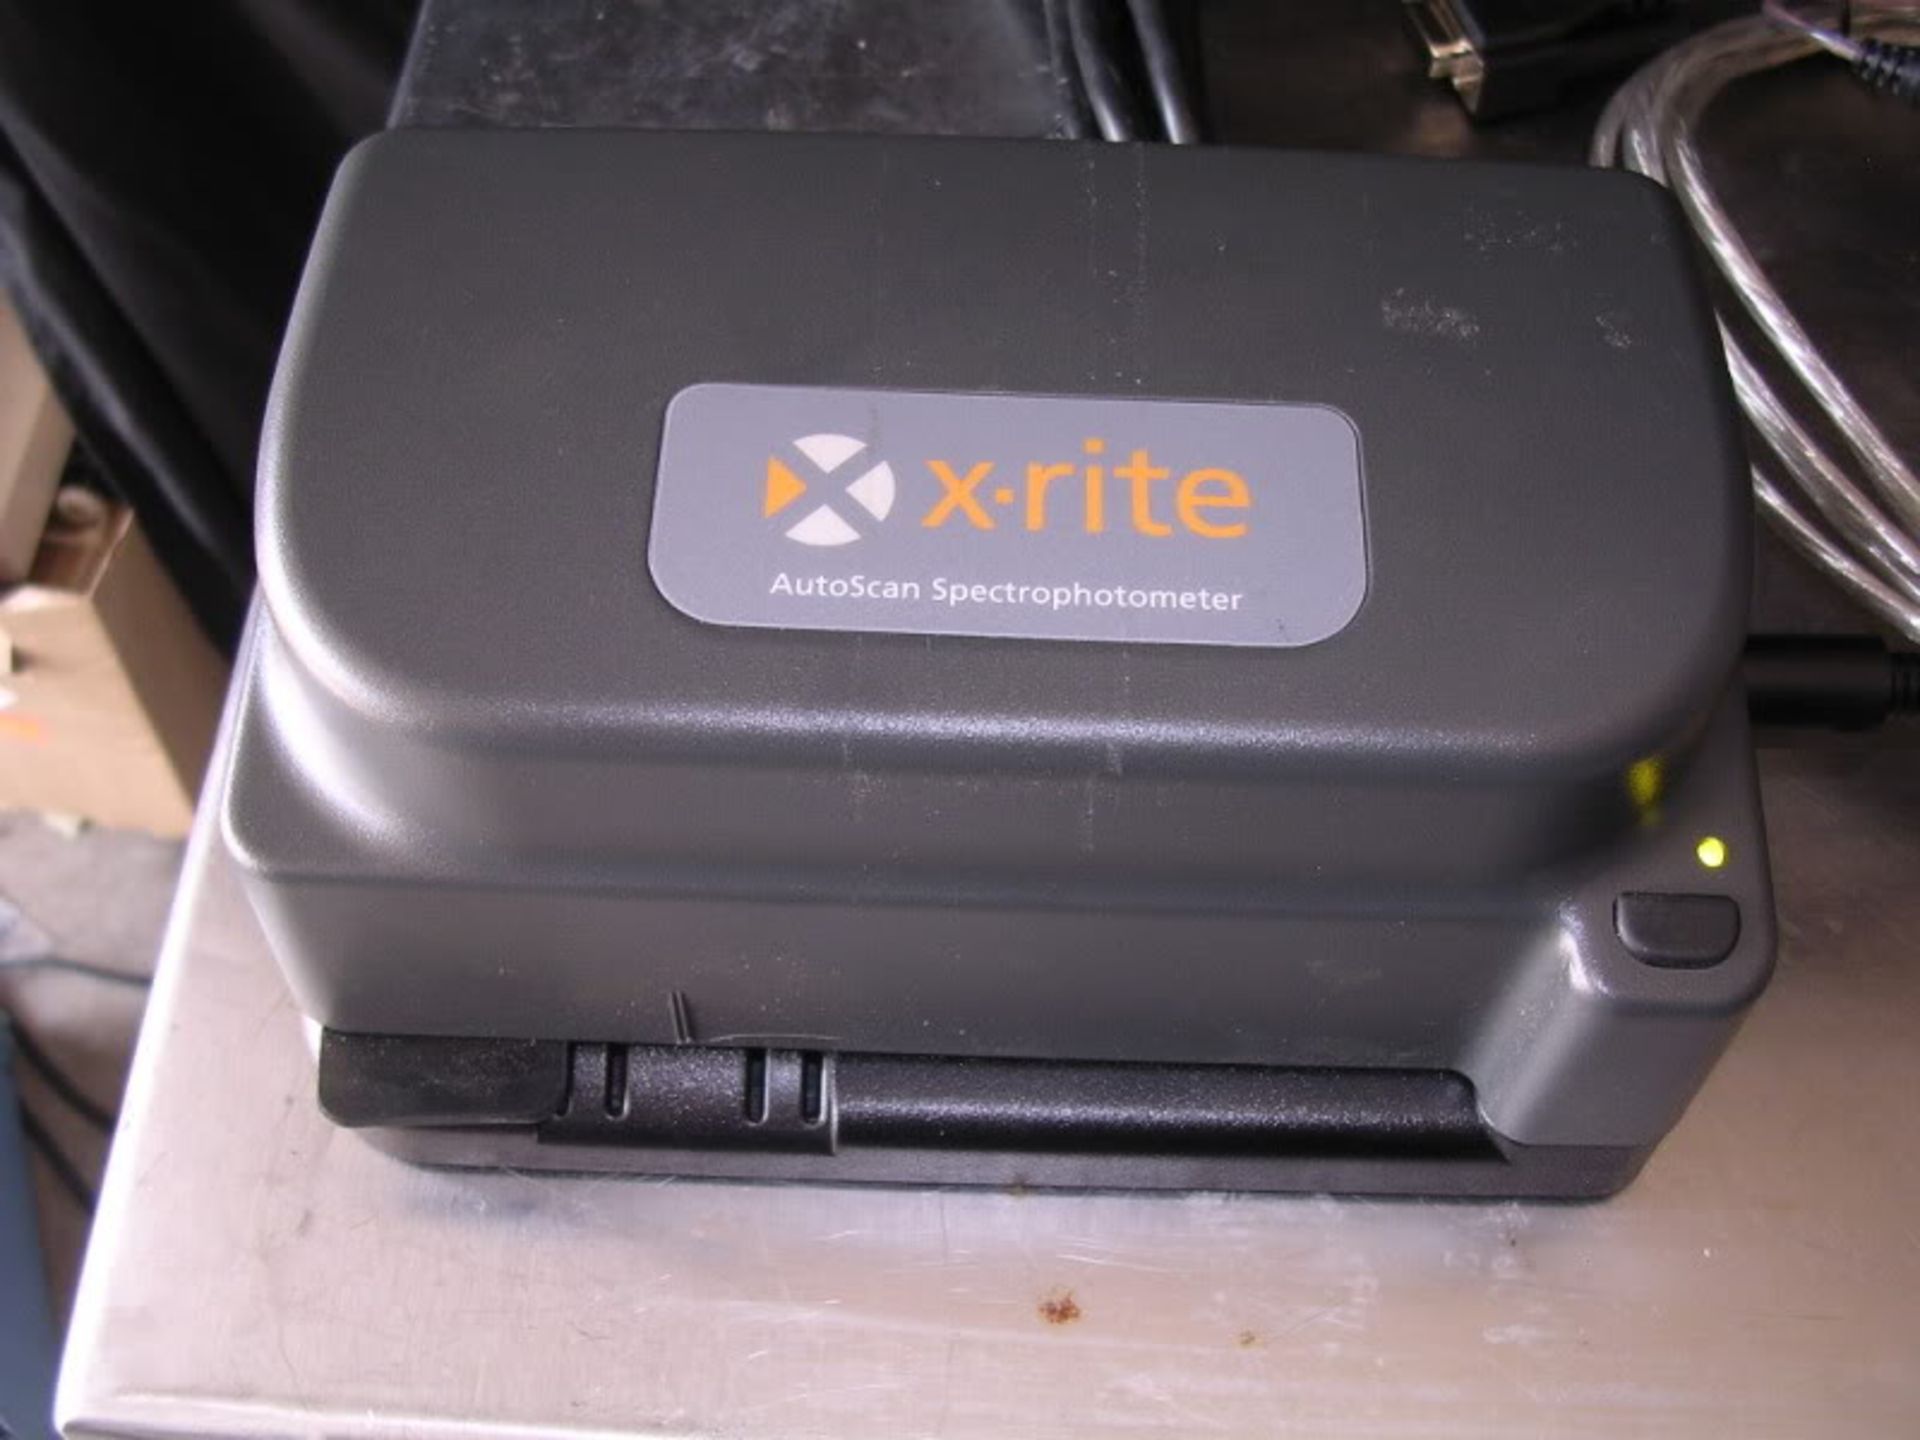 X-Rite dtp41b Spectrophotometer Autoscan Densitometer, Qty 1, 320752160727 - Image 2 of 4